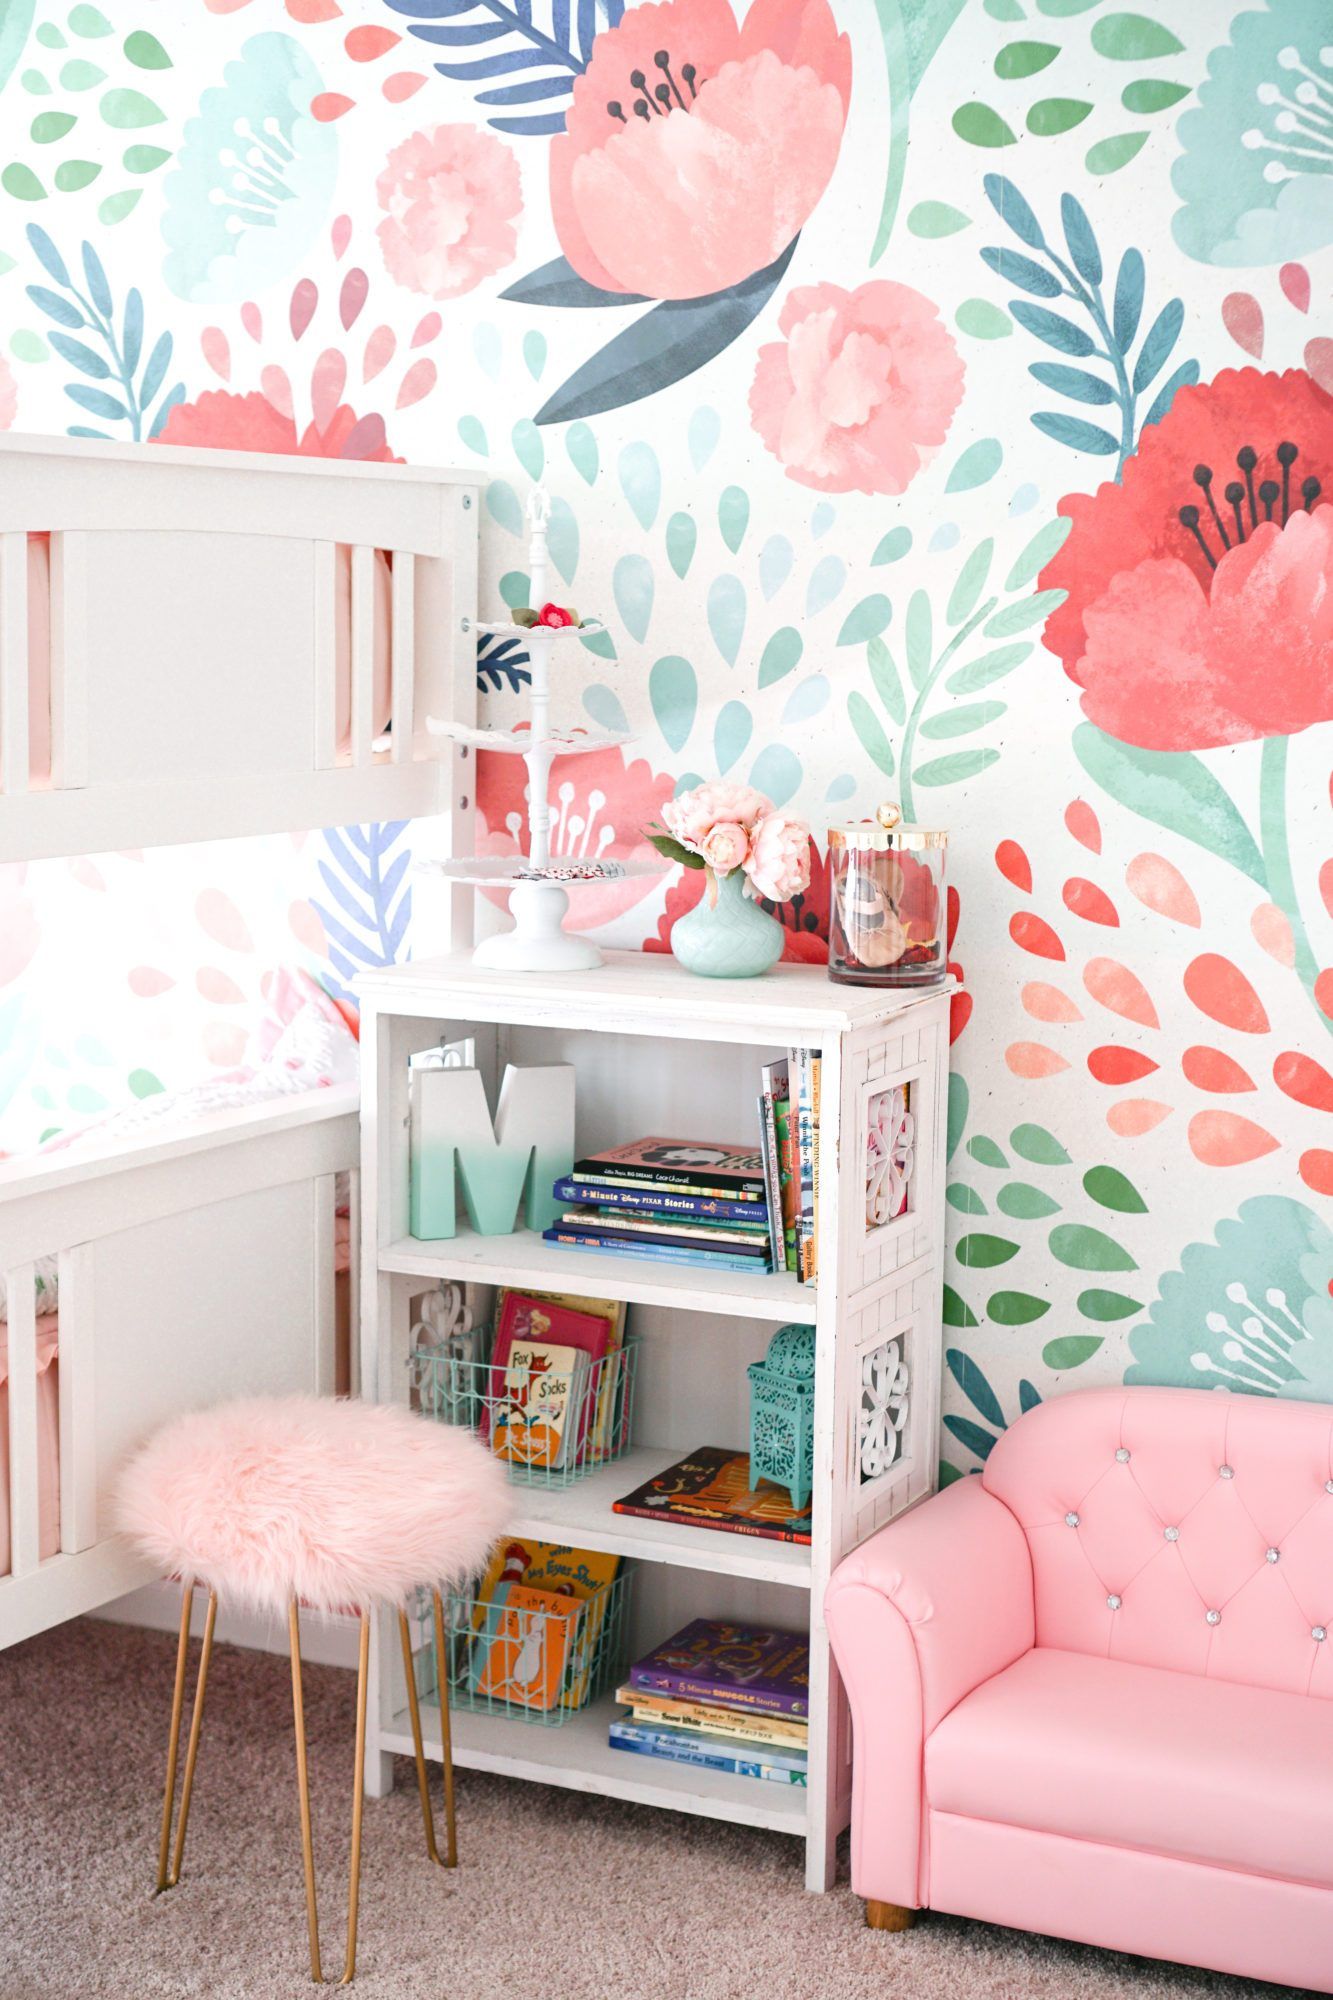 Updating Our Big Girls’ Bedroom with Wallpaper –